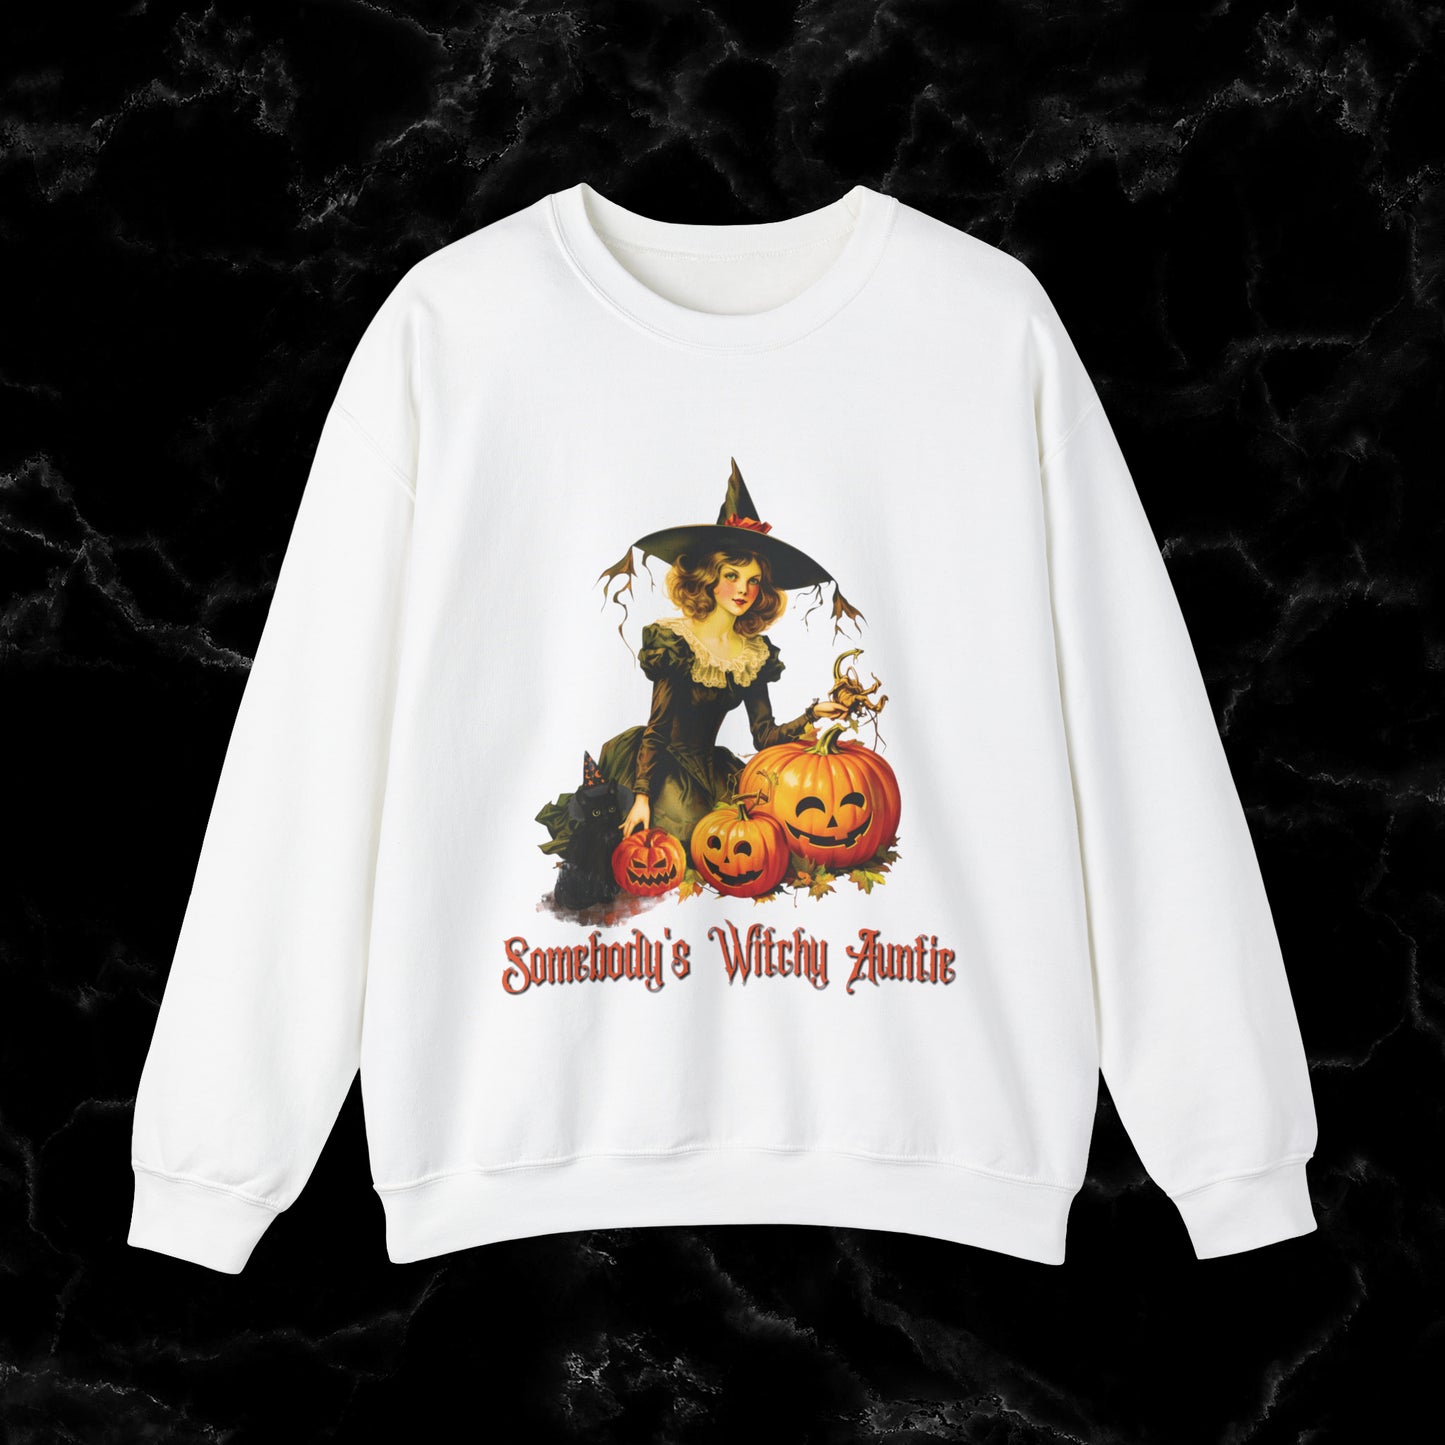 Witchy Auntie Sweatshirt - Cool Aunt Shirt for Halloweenl Vibes Sweatshirt S White 